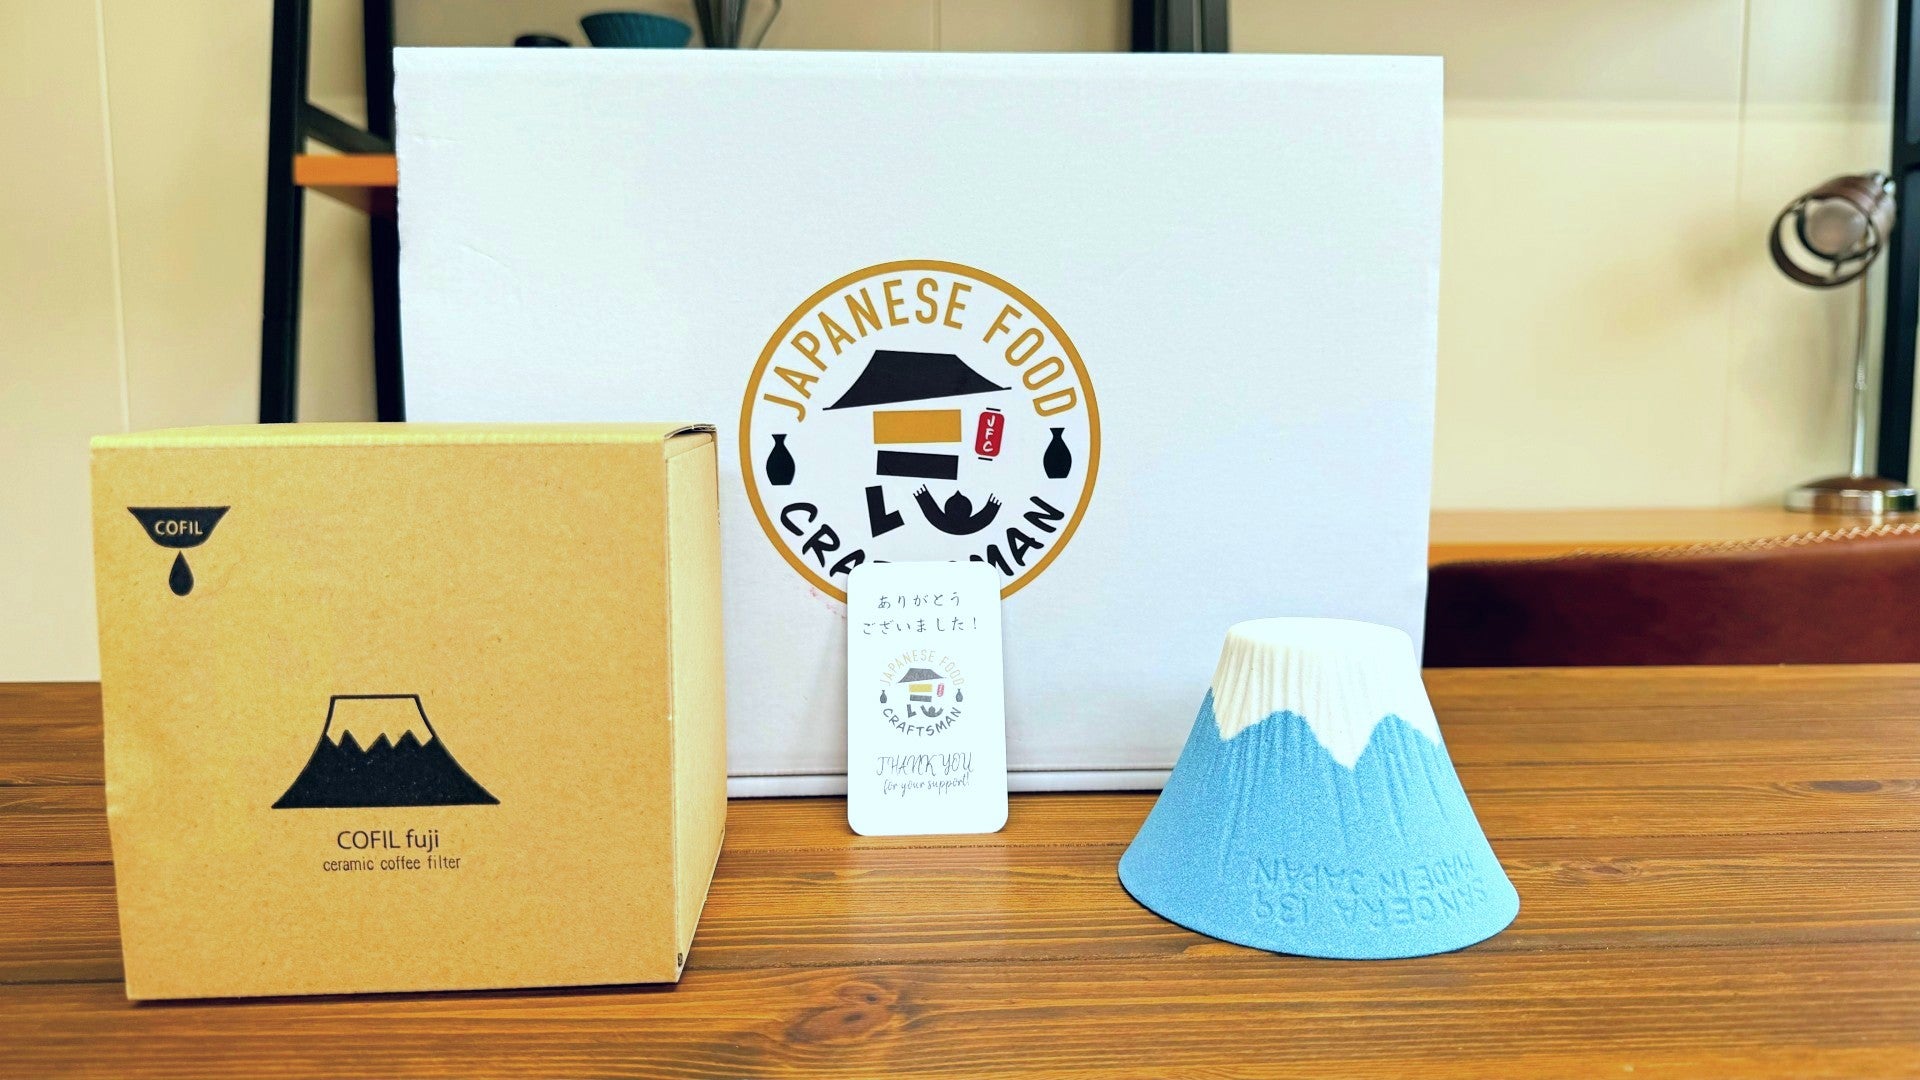 Ceramic coffee filter COFIL Mt. fuji with boxes and a thanks card